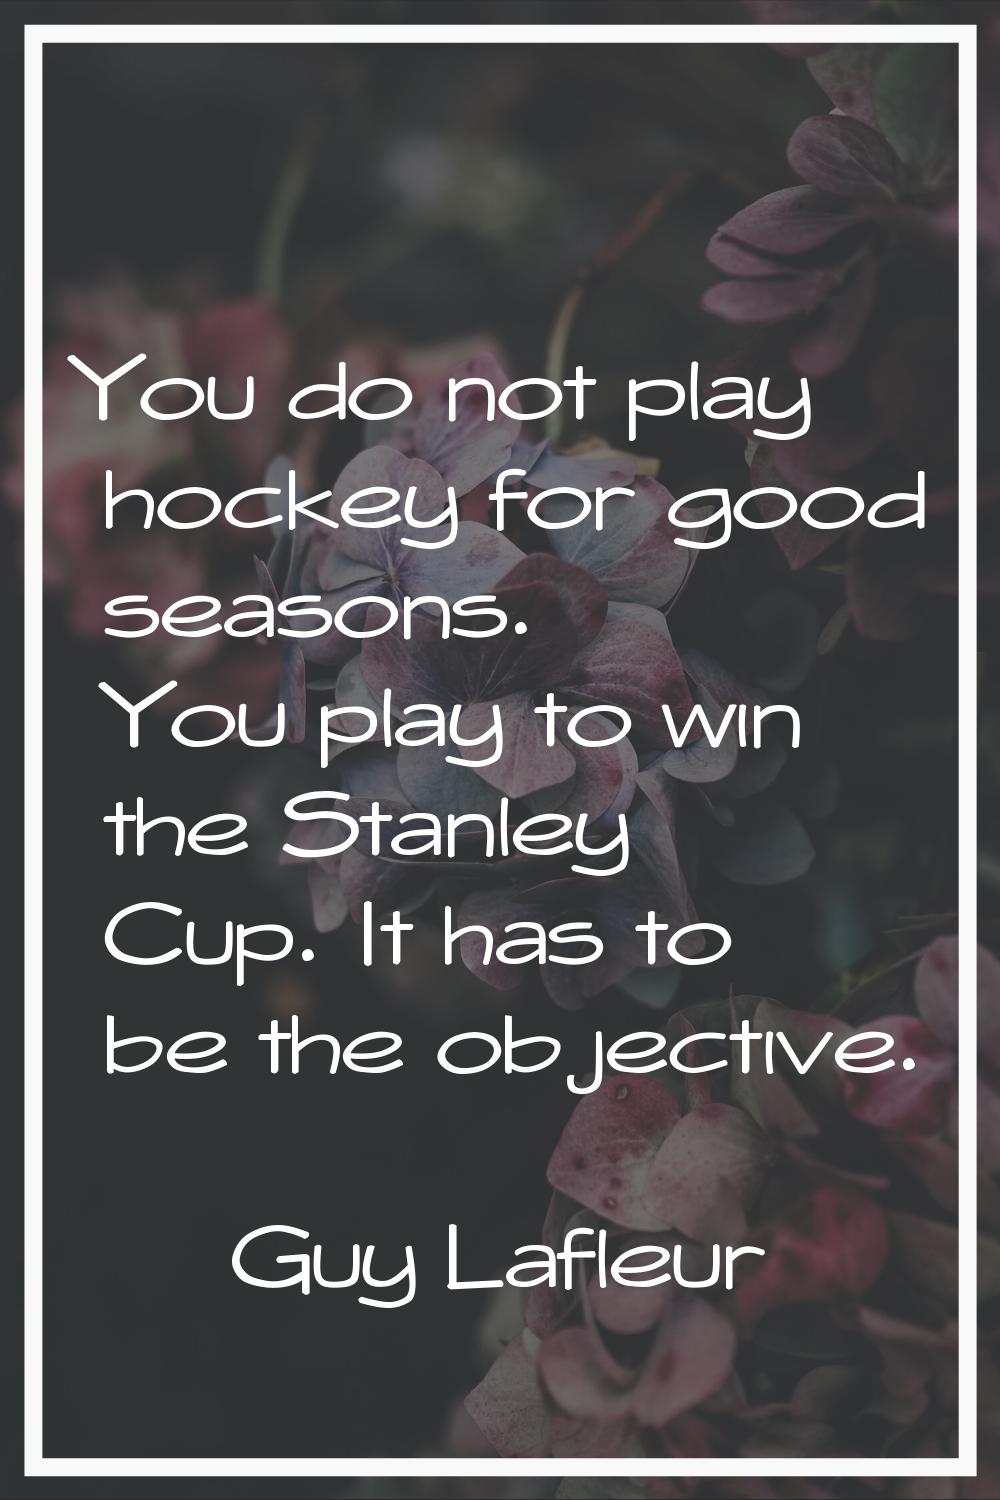 You do not play hockey for good seasons. You play to win the Stanley Cup. It has to be the objectiv